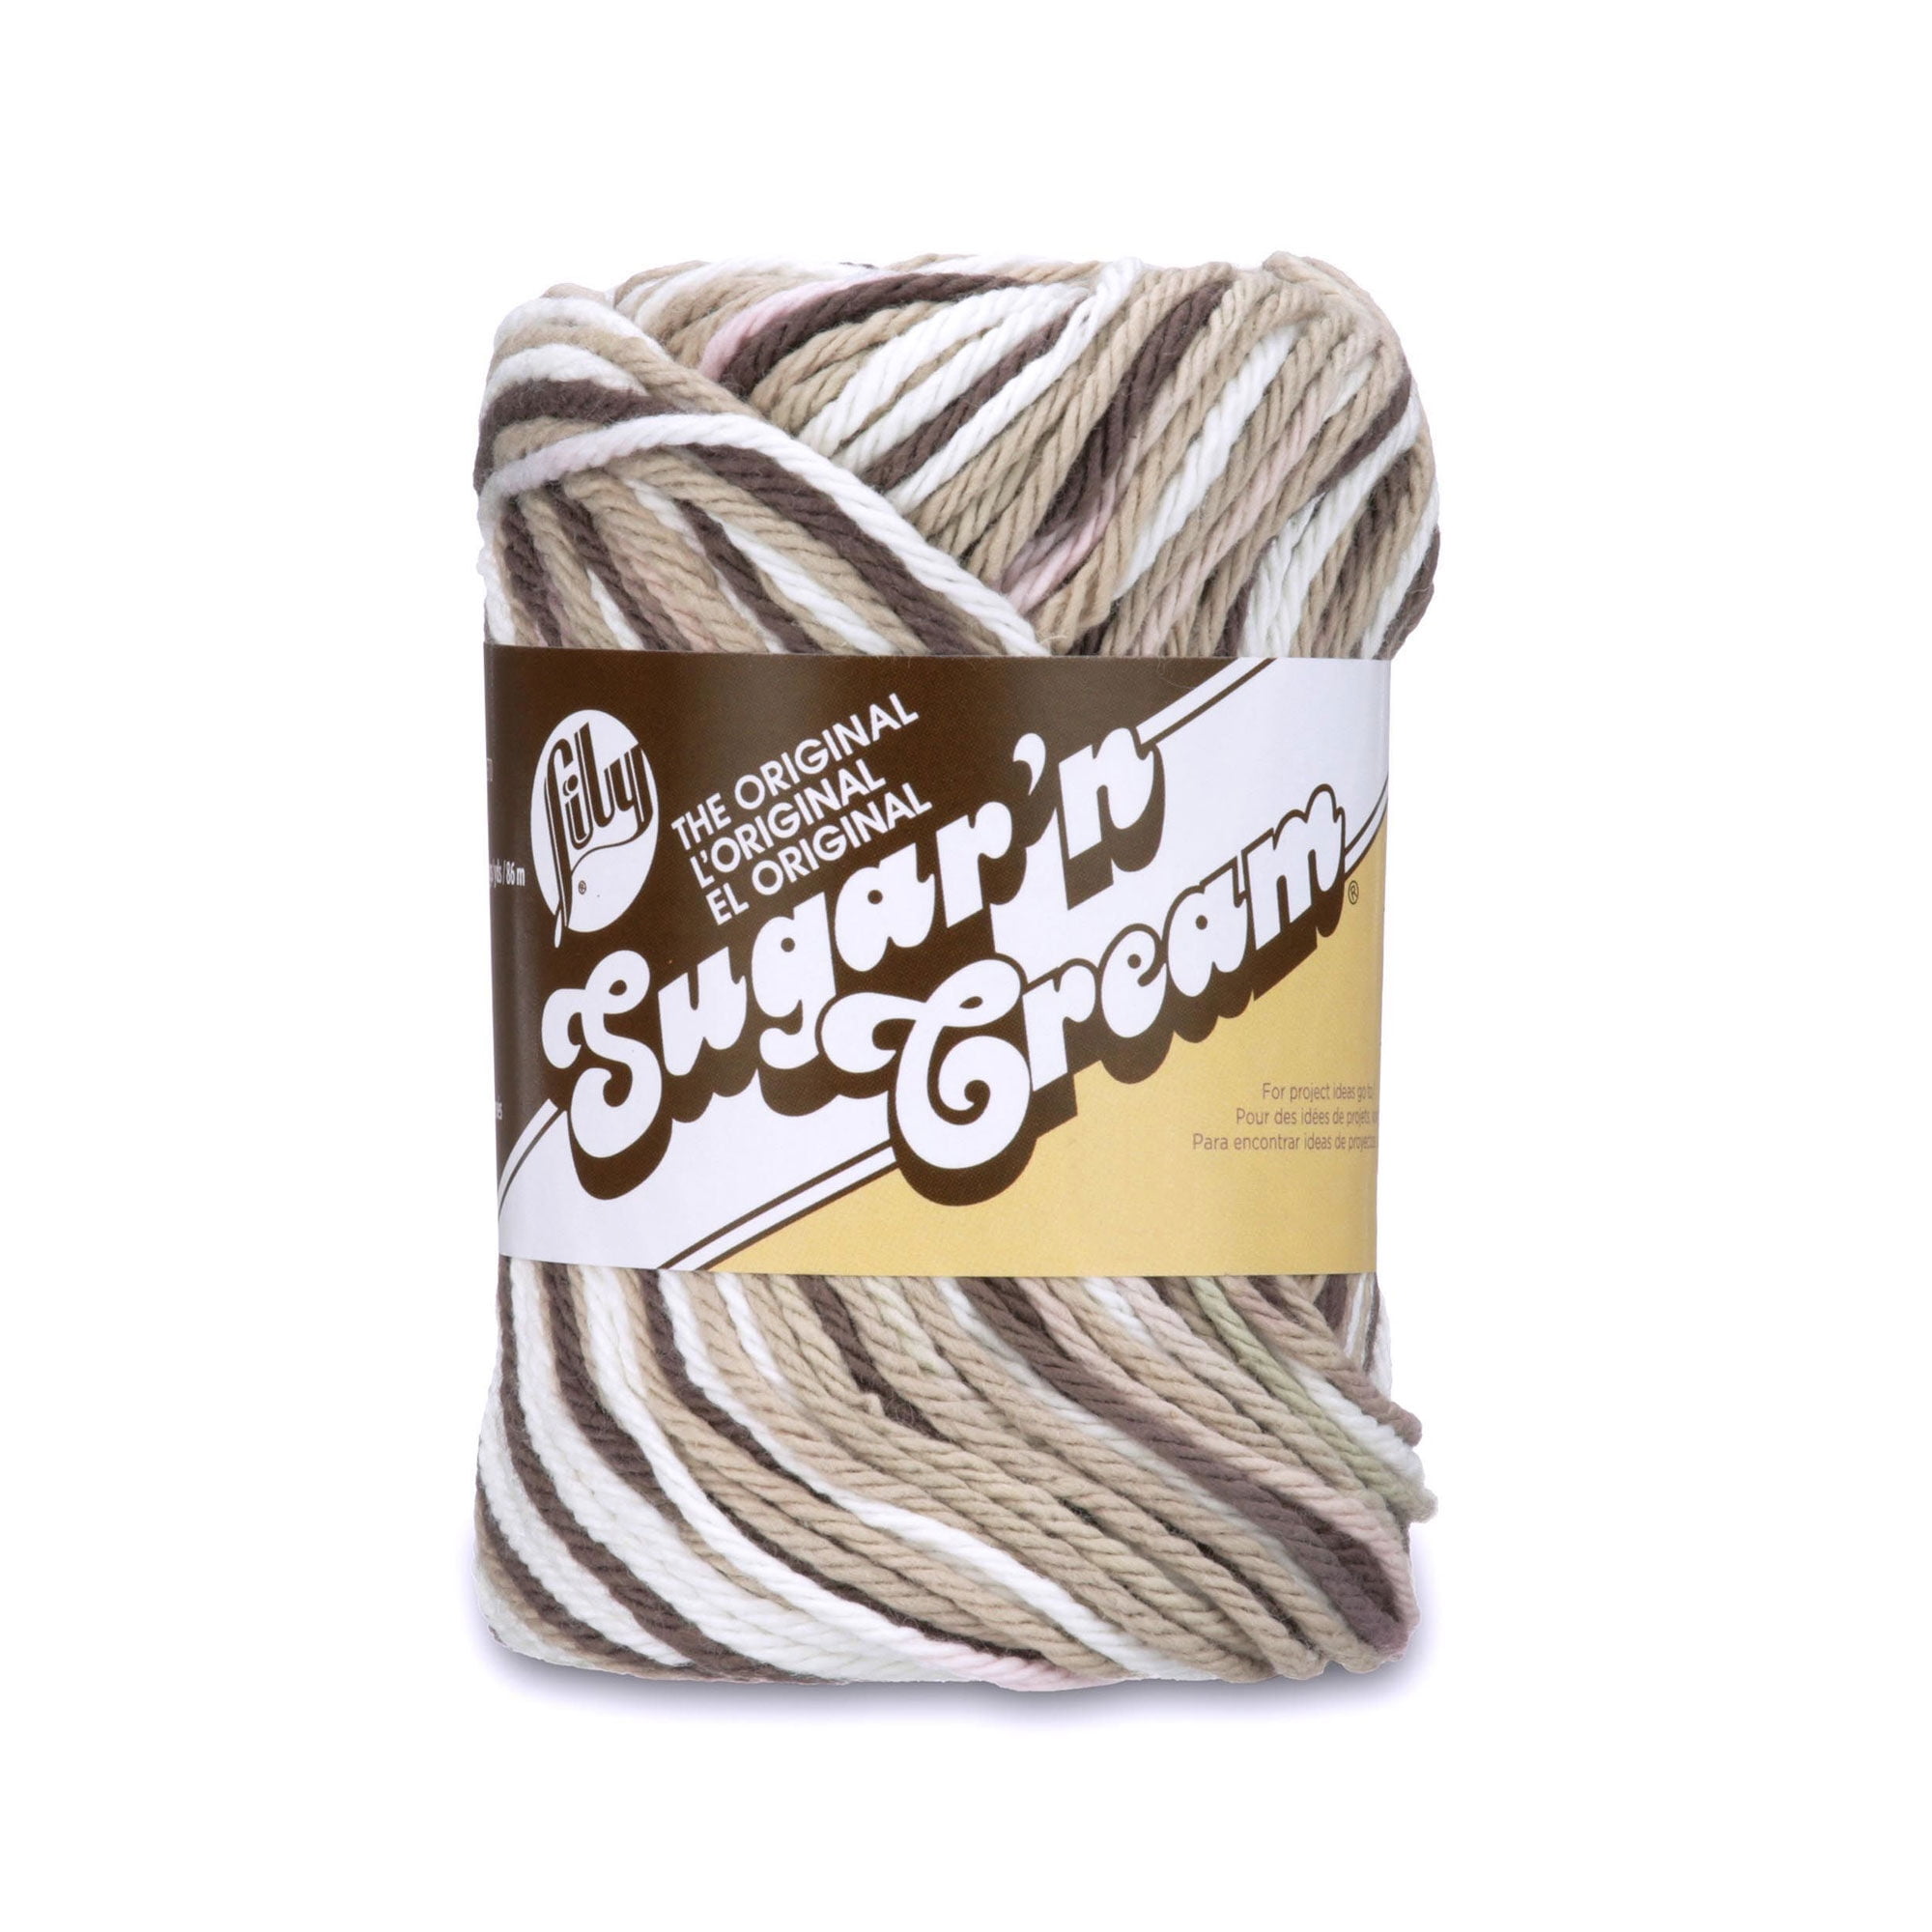 Lily Sugar'n Cream Yarn - Ombres Super Size-Chocolate Ombre, 1 count -  Harris Teeter